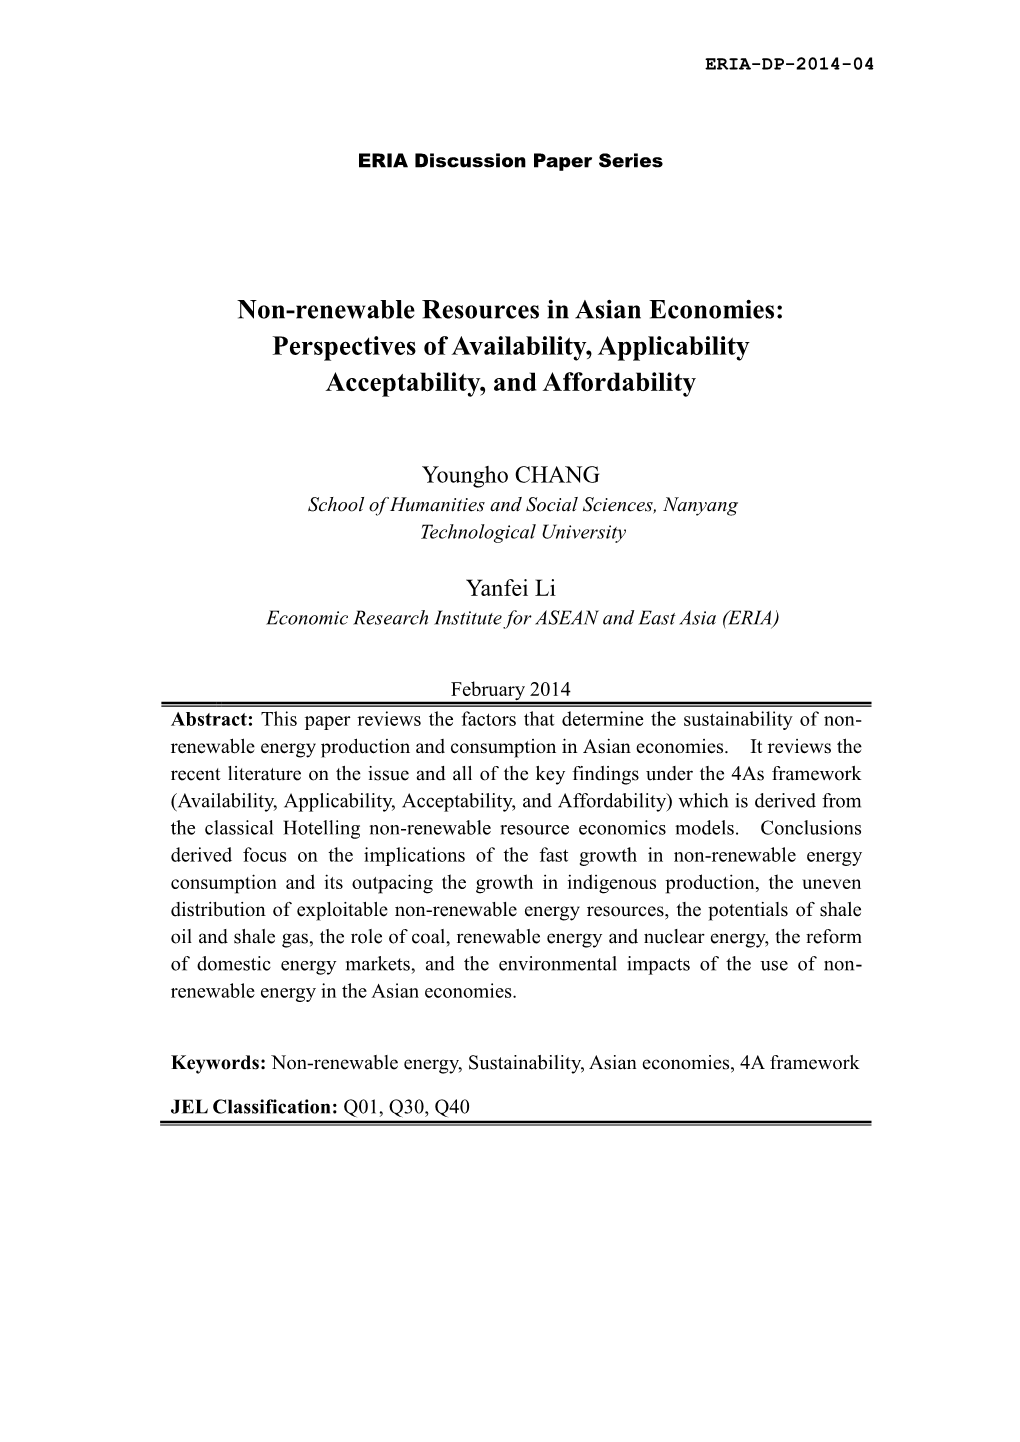 Non-Renewable Resources in Asian Economies: Perspectives of Availability, Applicability Acceptability, and Affordability